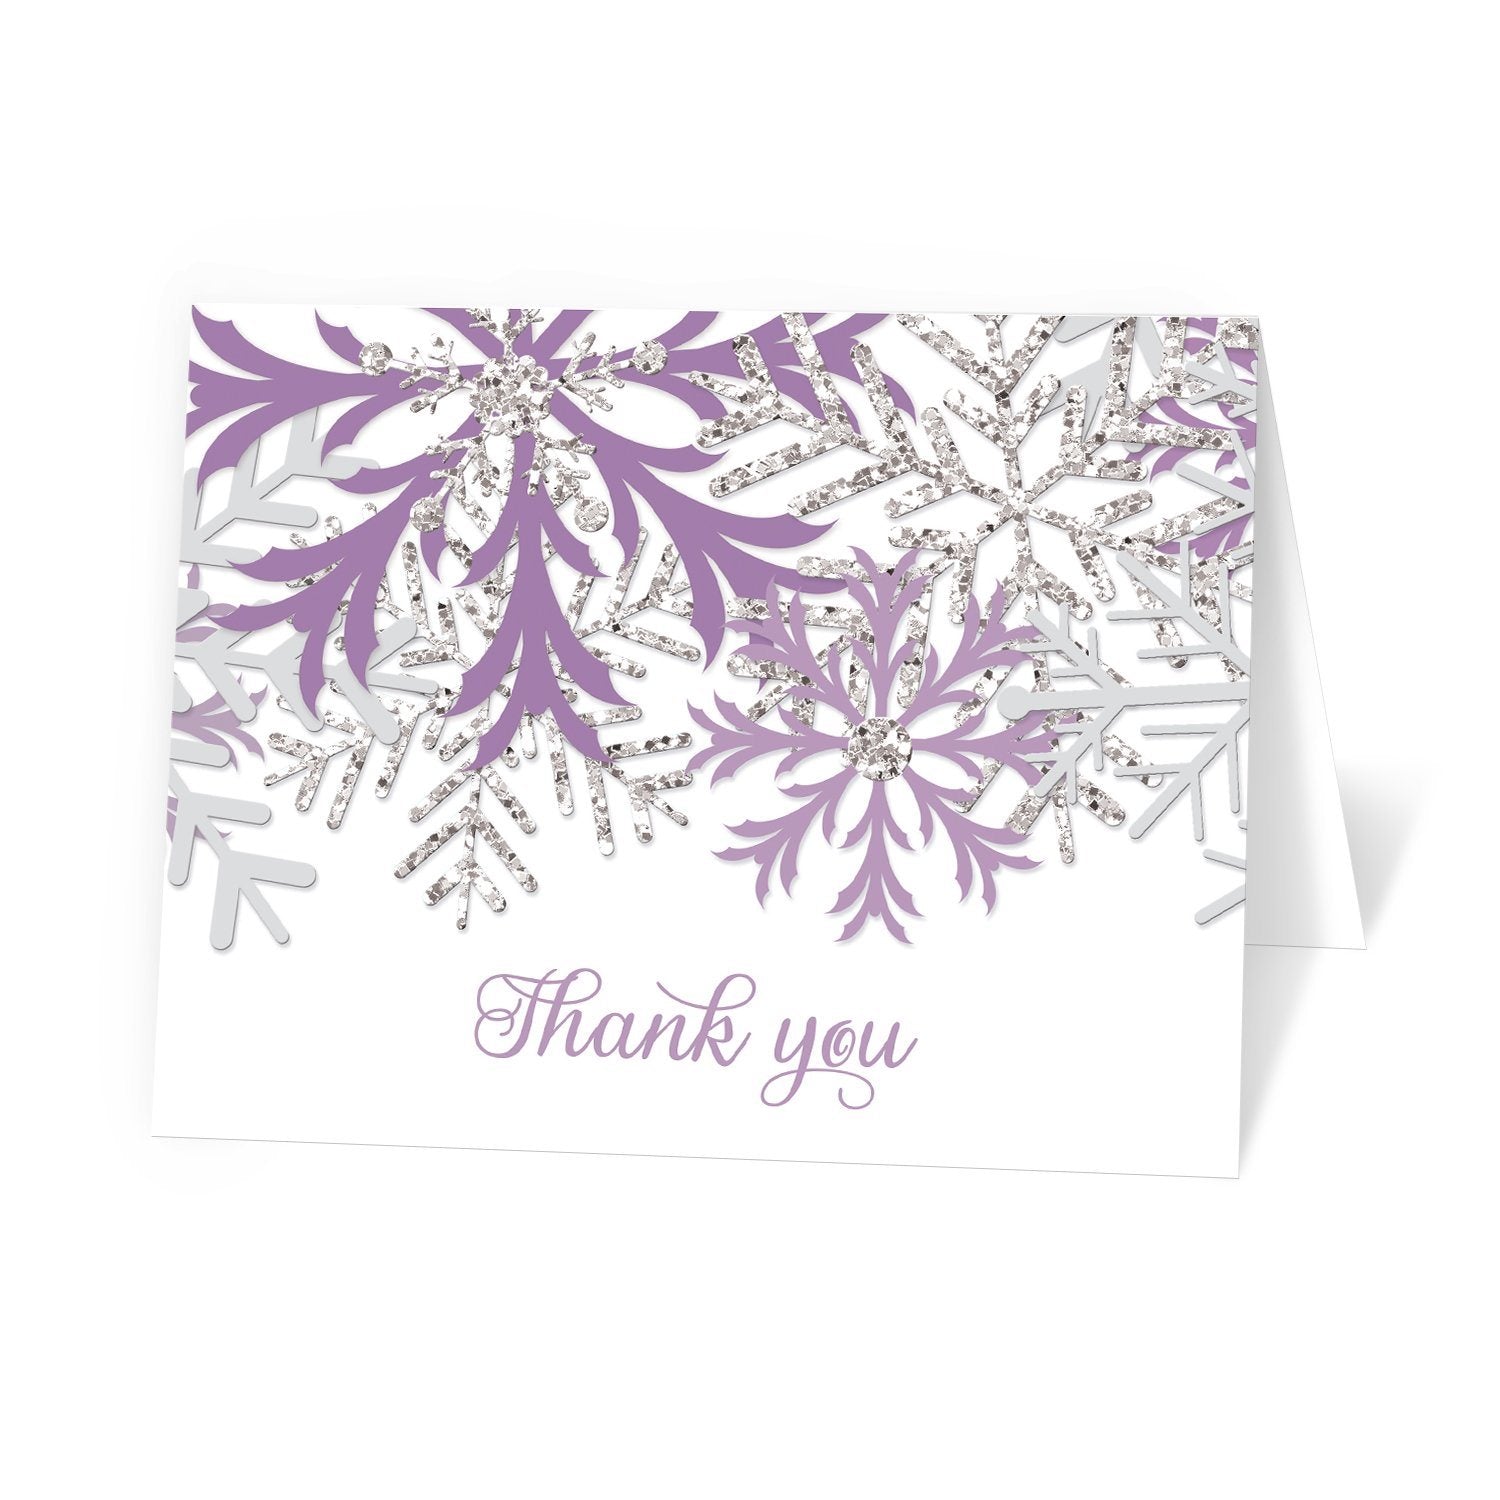 Winter Purple Silver Snowflake Thank You Cards at Artistically Invited. Winter purple silver snowflake thank you cards with purple and silver-colored glitter-illustrated snowflakes over a white background and 'Thank you' printed in a whimsical purple script font.